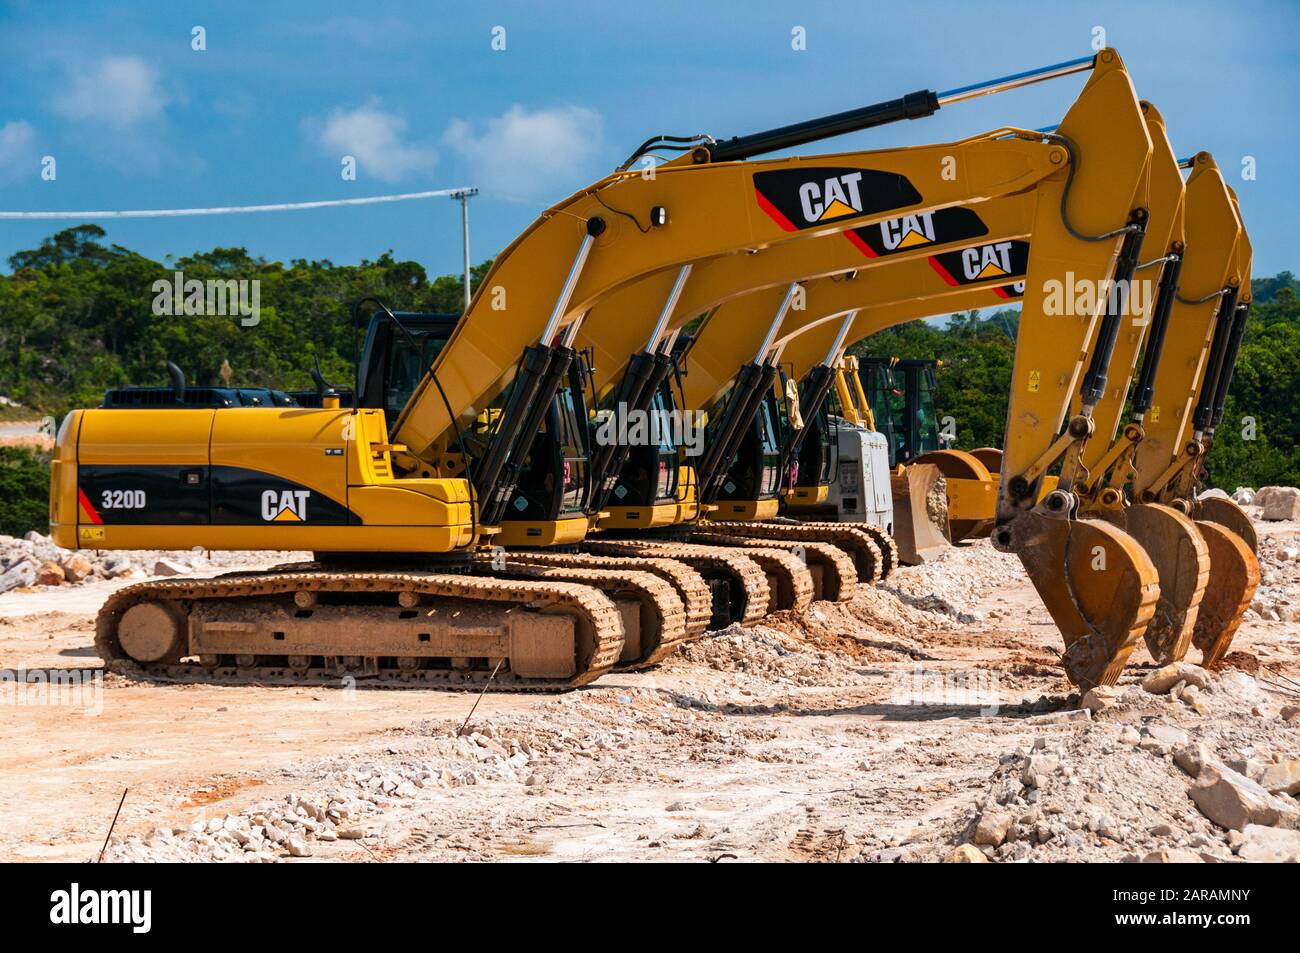 Infrastructure Bill A-row-of-caterpillar-320d-excavators-taking-a-break-from-constructing-a-new-casino-in-cambodia-other-caterpillar-equipment-bokor-hill-station-2ARAMNY